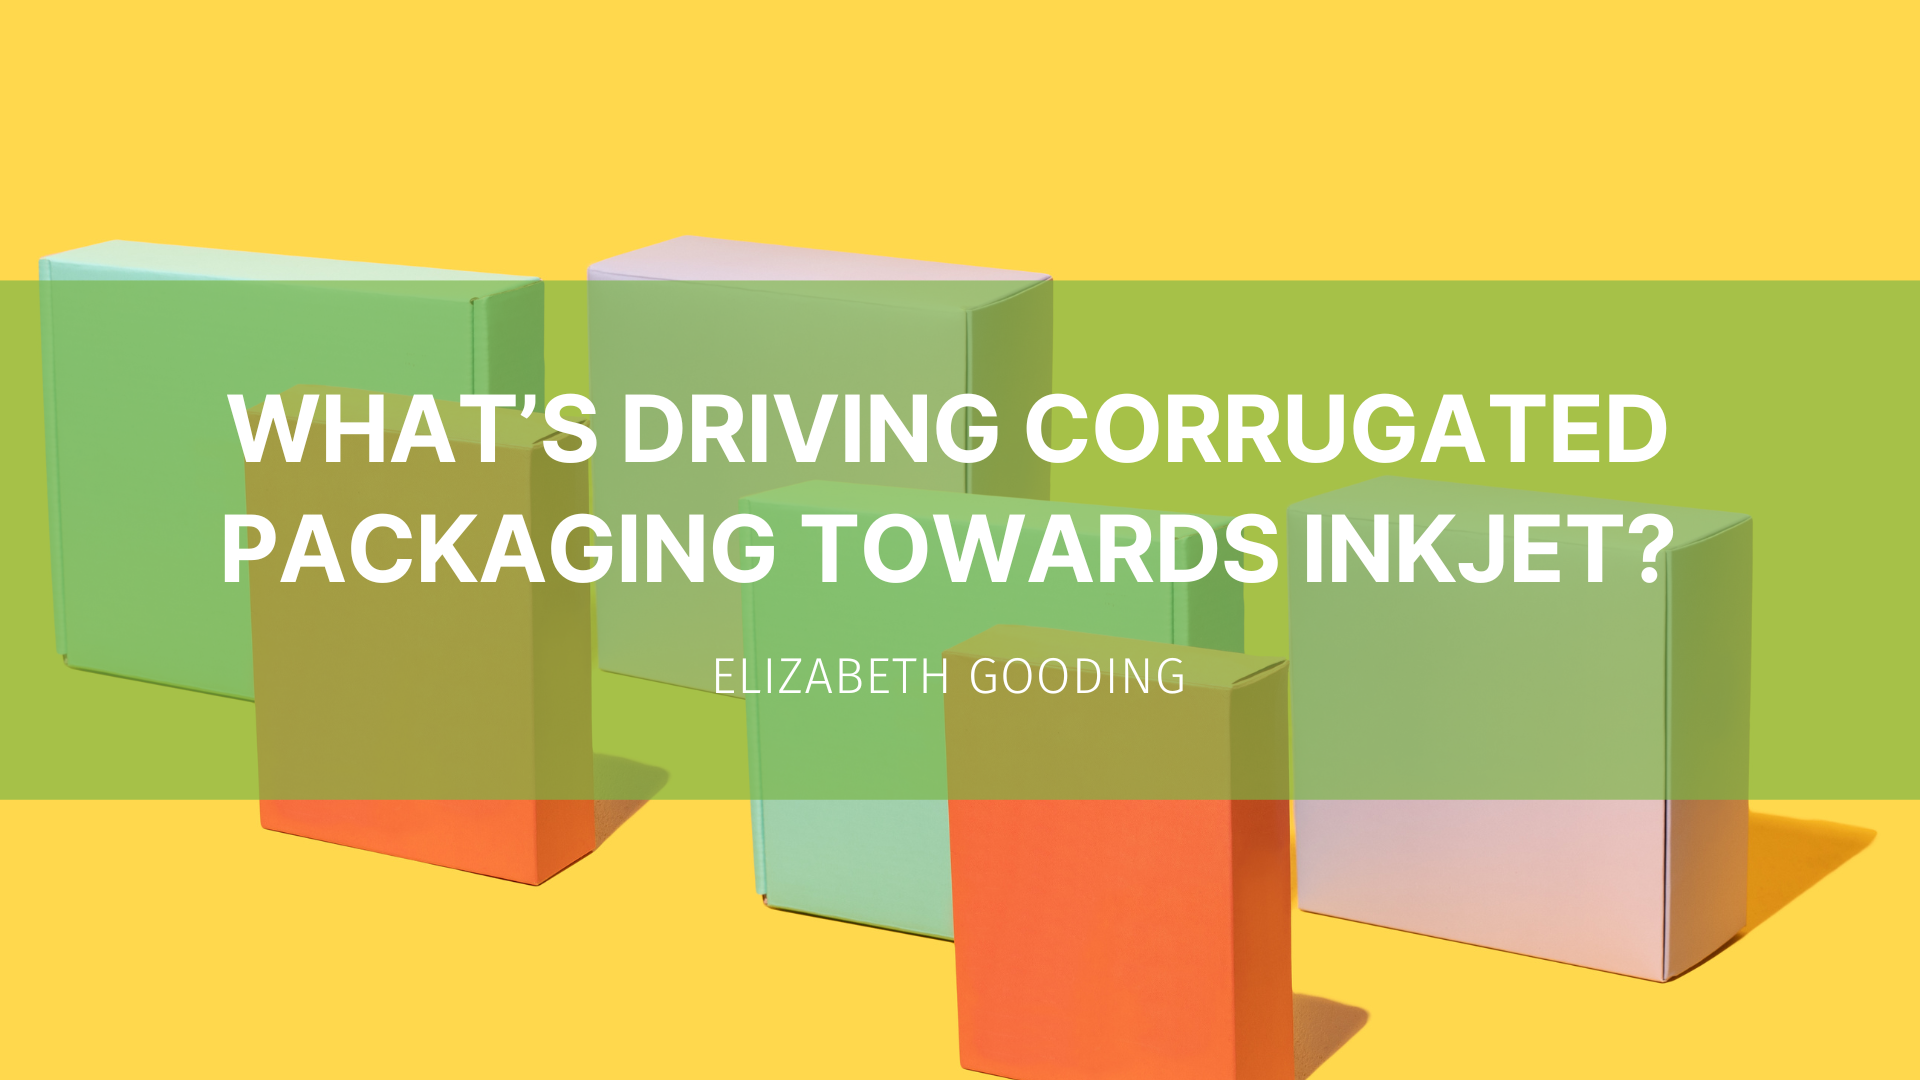 Featured image for “What’s driving corrugated packaging towards inkjet?”